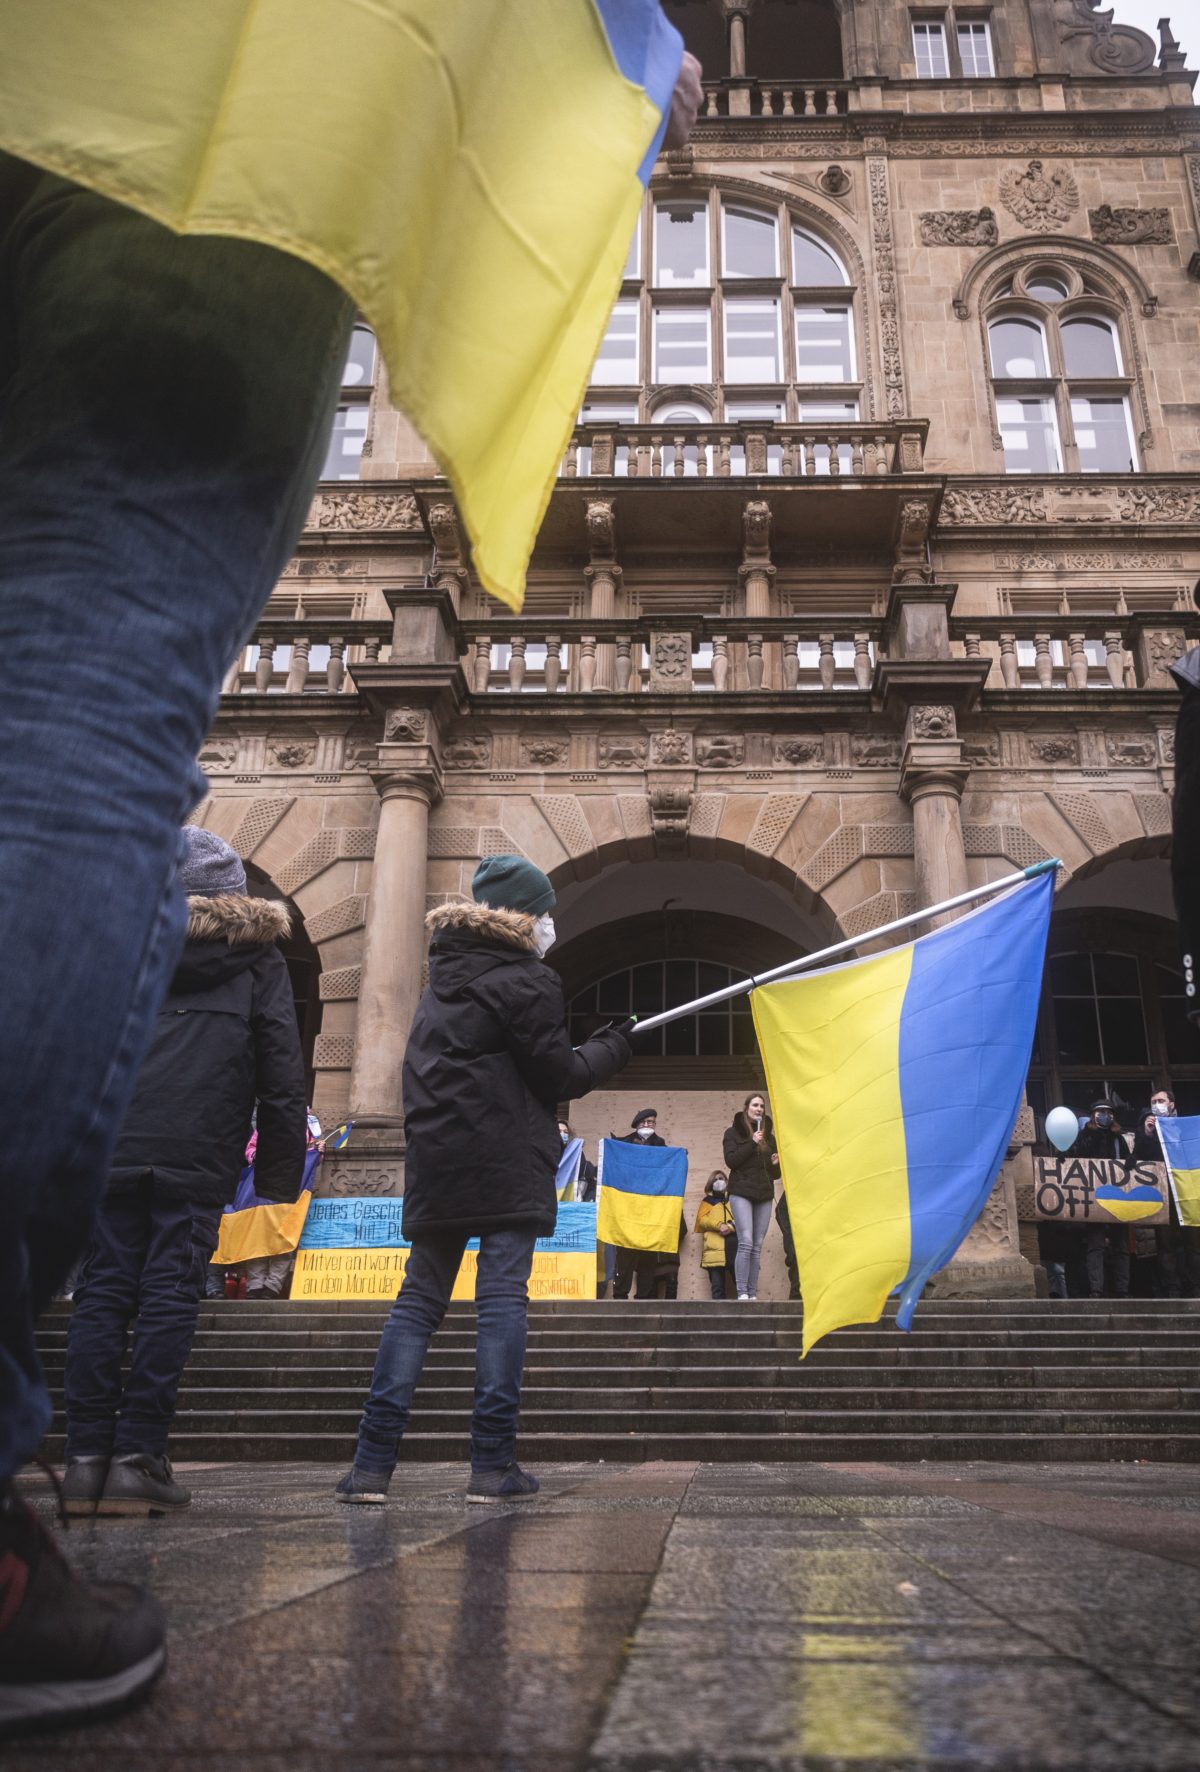 A young boy waving a Ukrainian flag in the center of a demonstration showing solidarity with Ukraine and the Ukrainian people in Bielefeld, Germany.